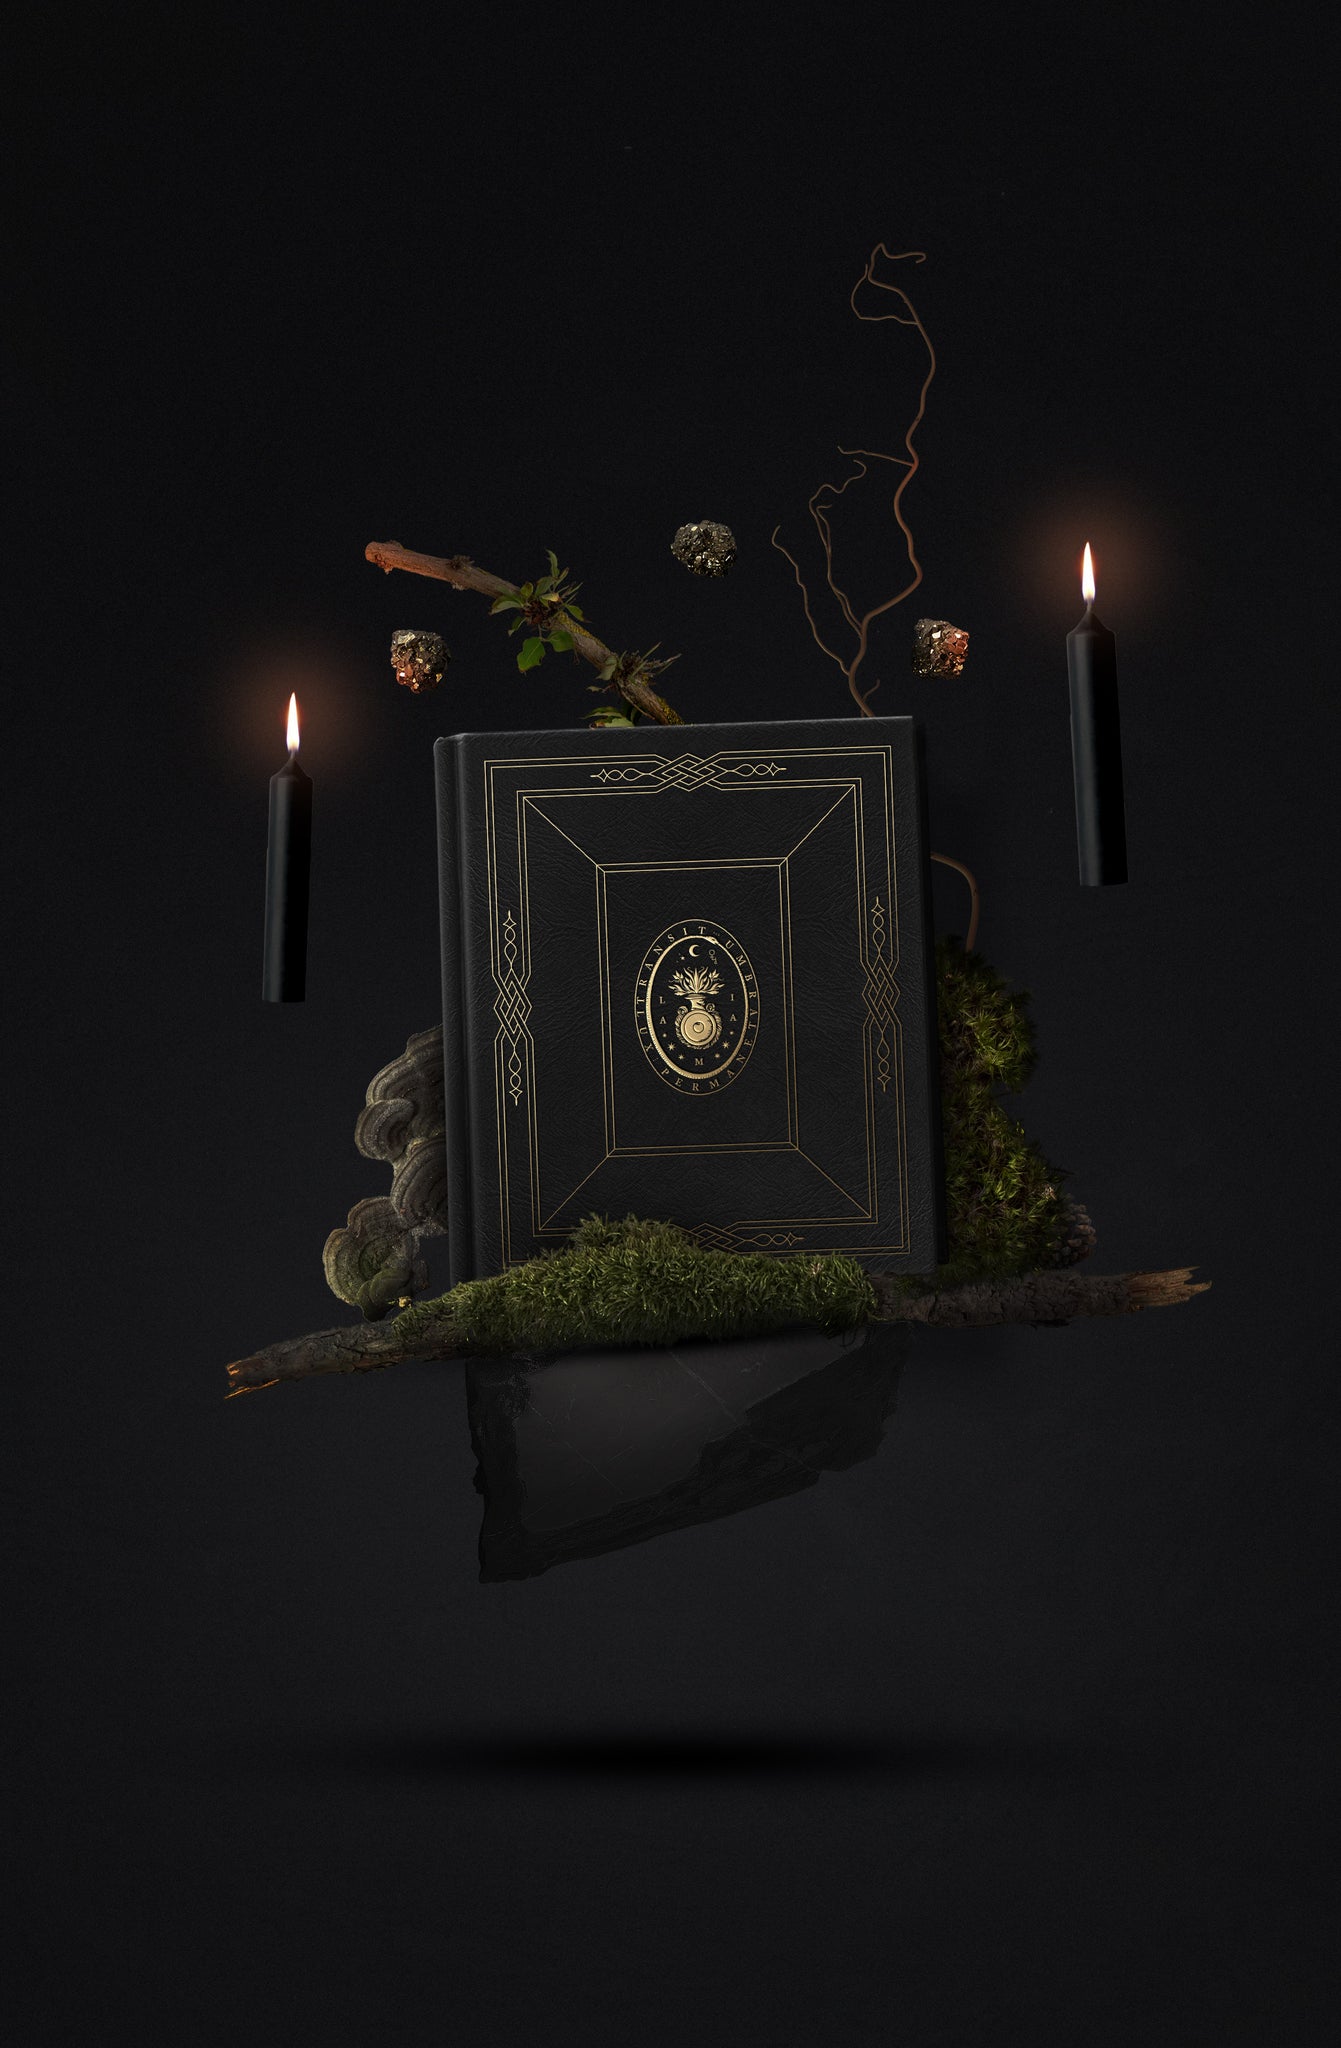 Grimoire Noble Edition, leather book with and gold foil for witches and magic, by Cocorrina & Co